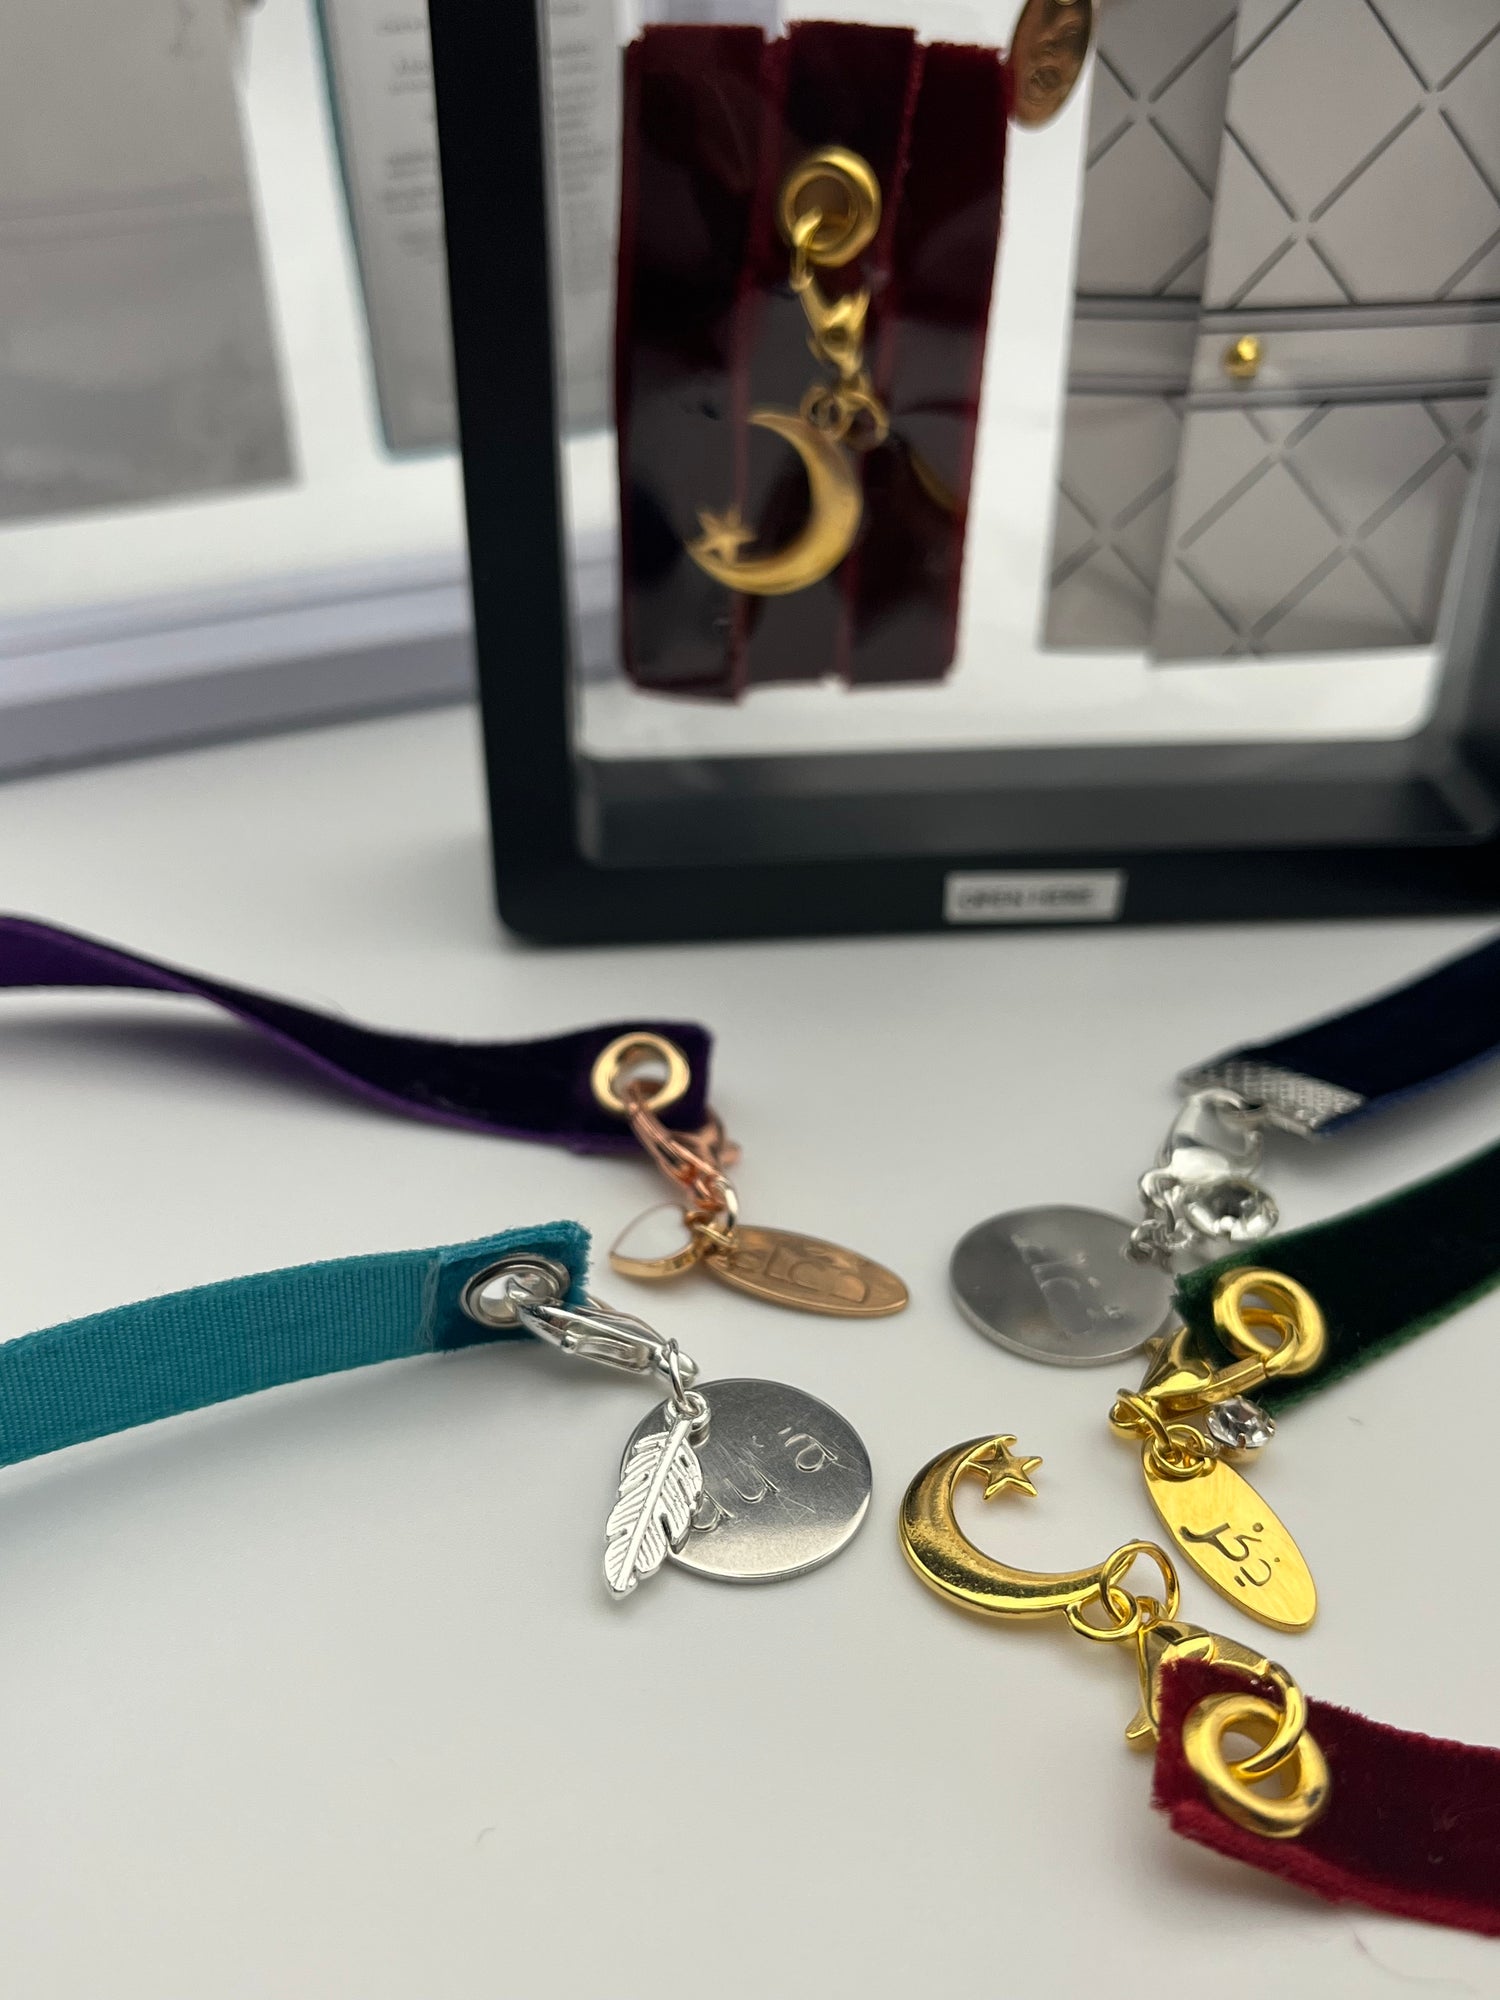 BeLoved Gifts Islamic Inspired velvet Ribbon bookmarks. Hand-stamped charm with a charm, that says Dua in Arabic and English Dhikr in Arabic, or a Star and moon BeLoved Gifts exclusive feature of mini card with a hidden message. 